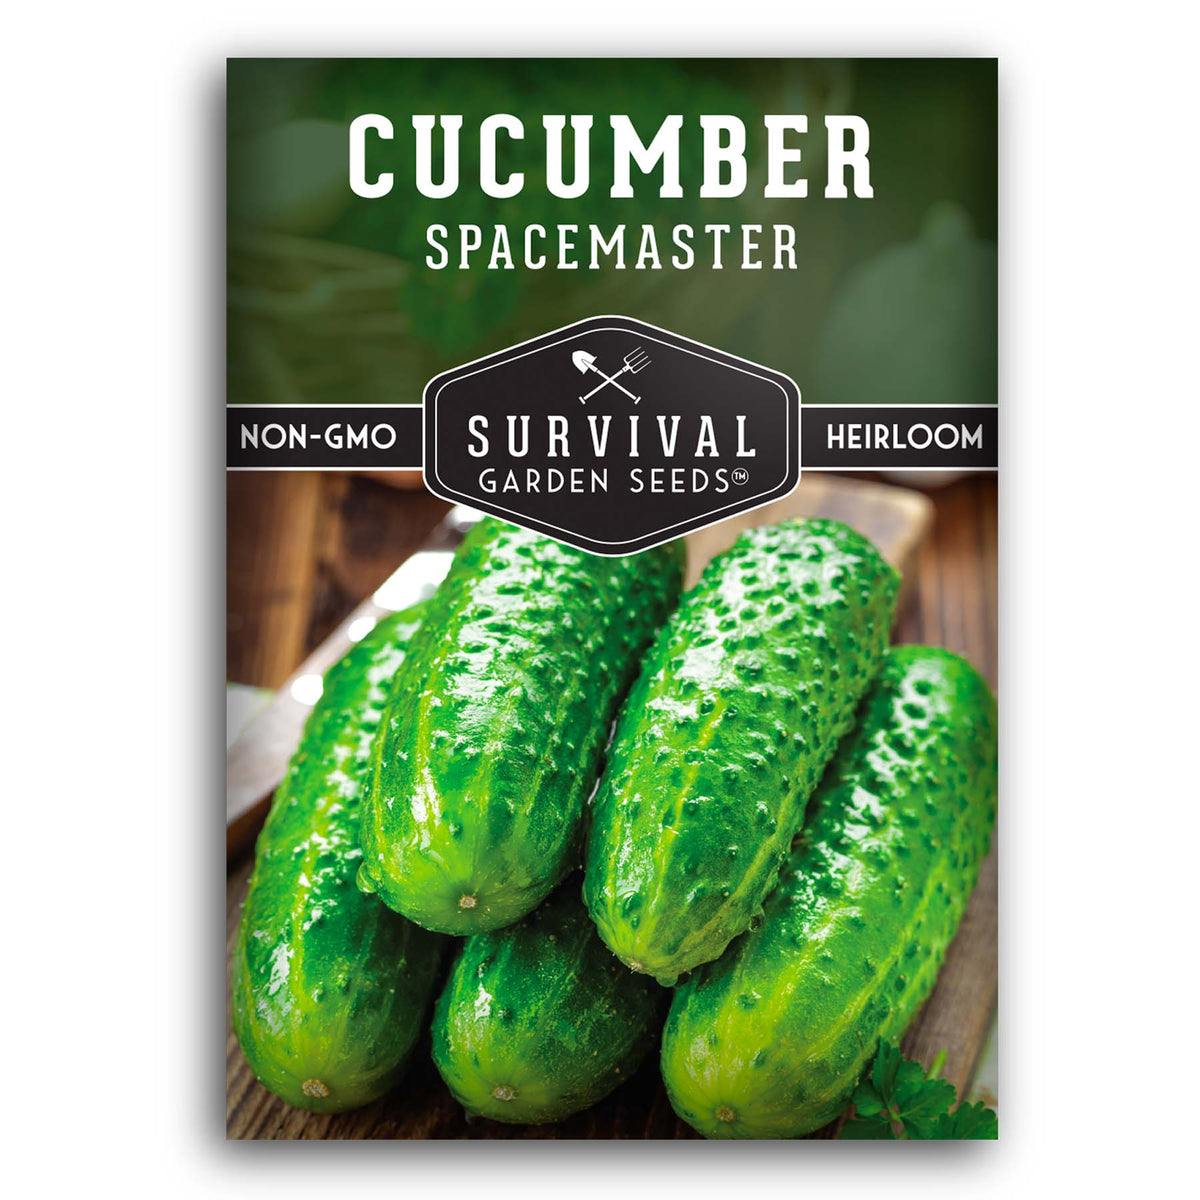 Spacemaster cucumber seeds for planting